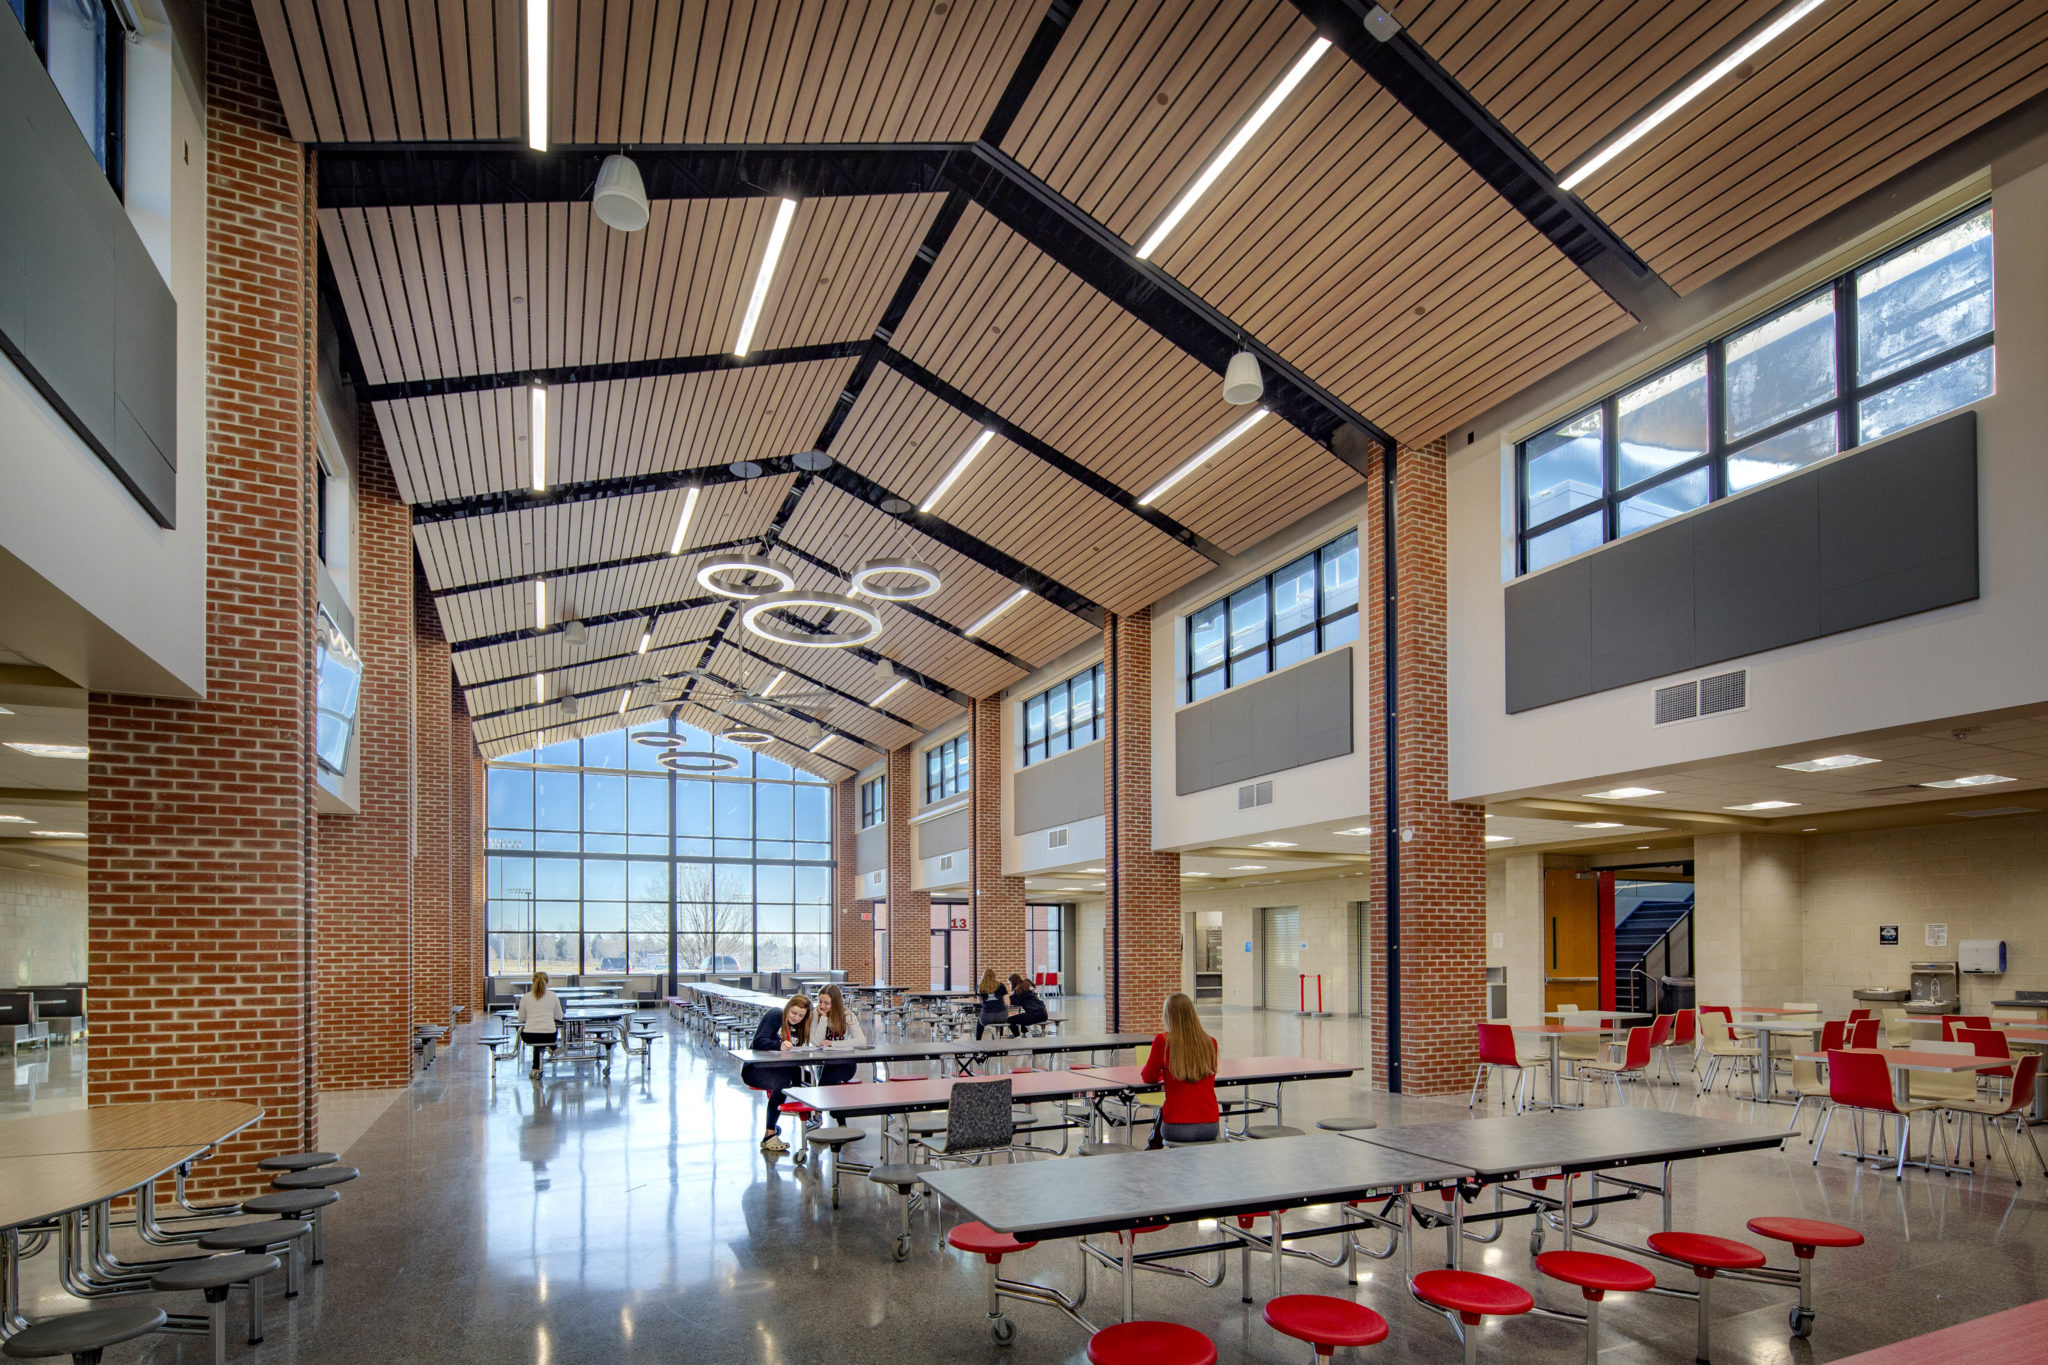 Mount-Horeb-HS_Cafeteria_BF_For-Web-2048x1365